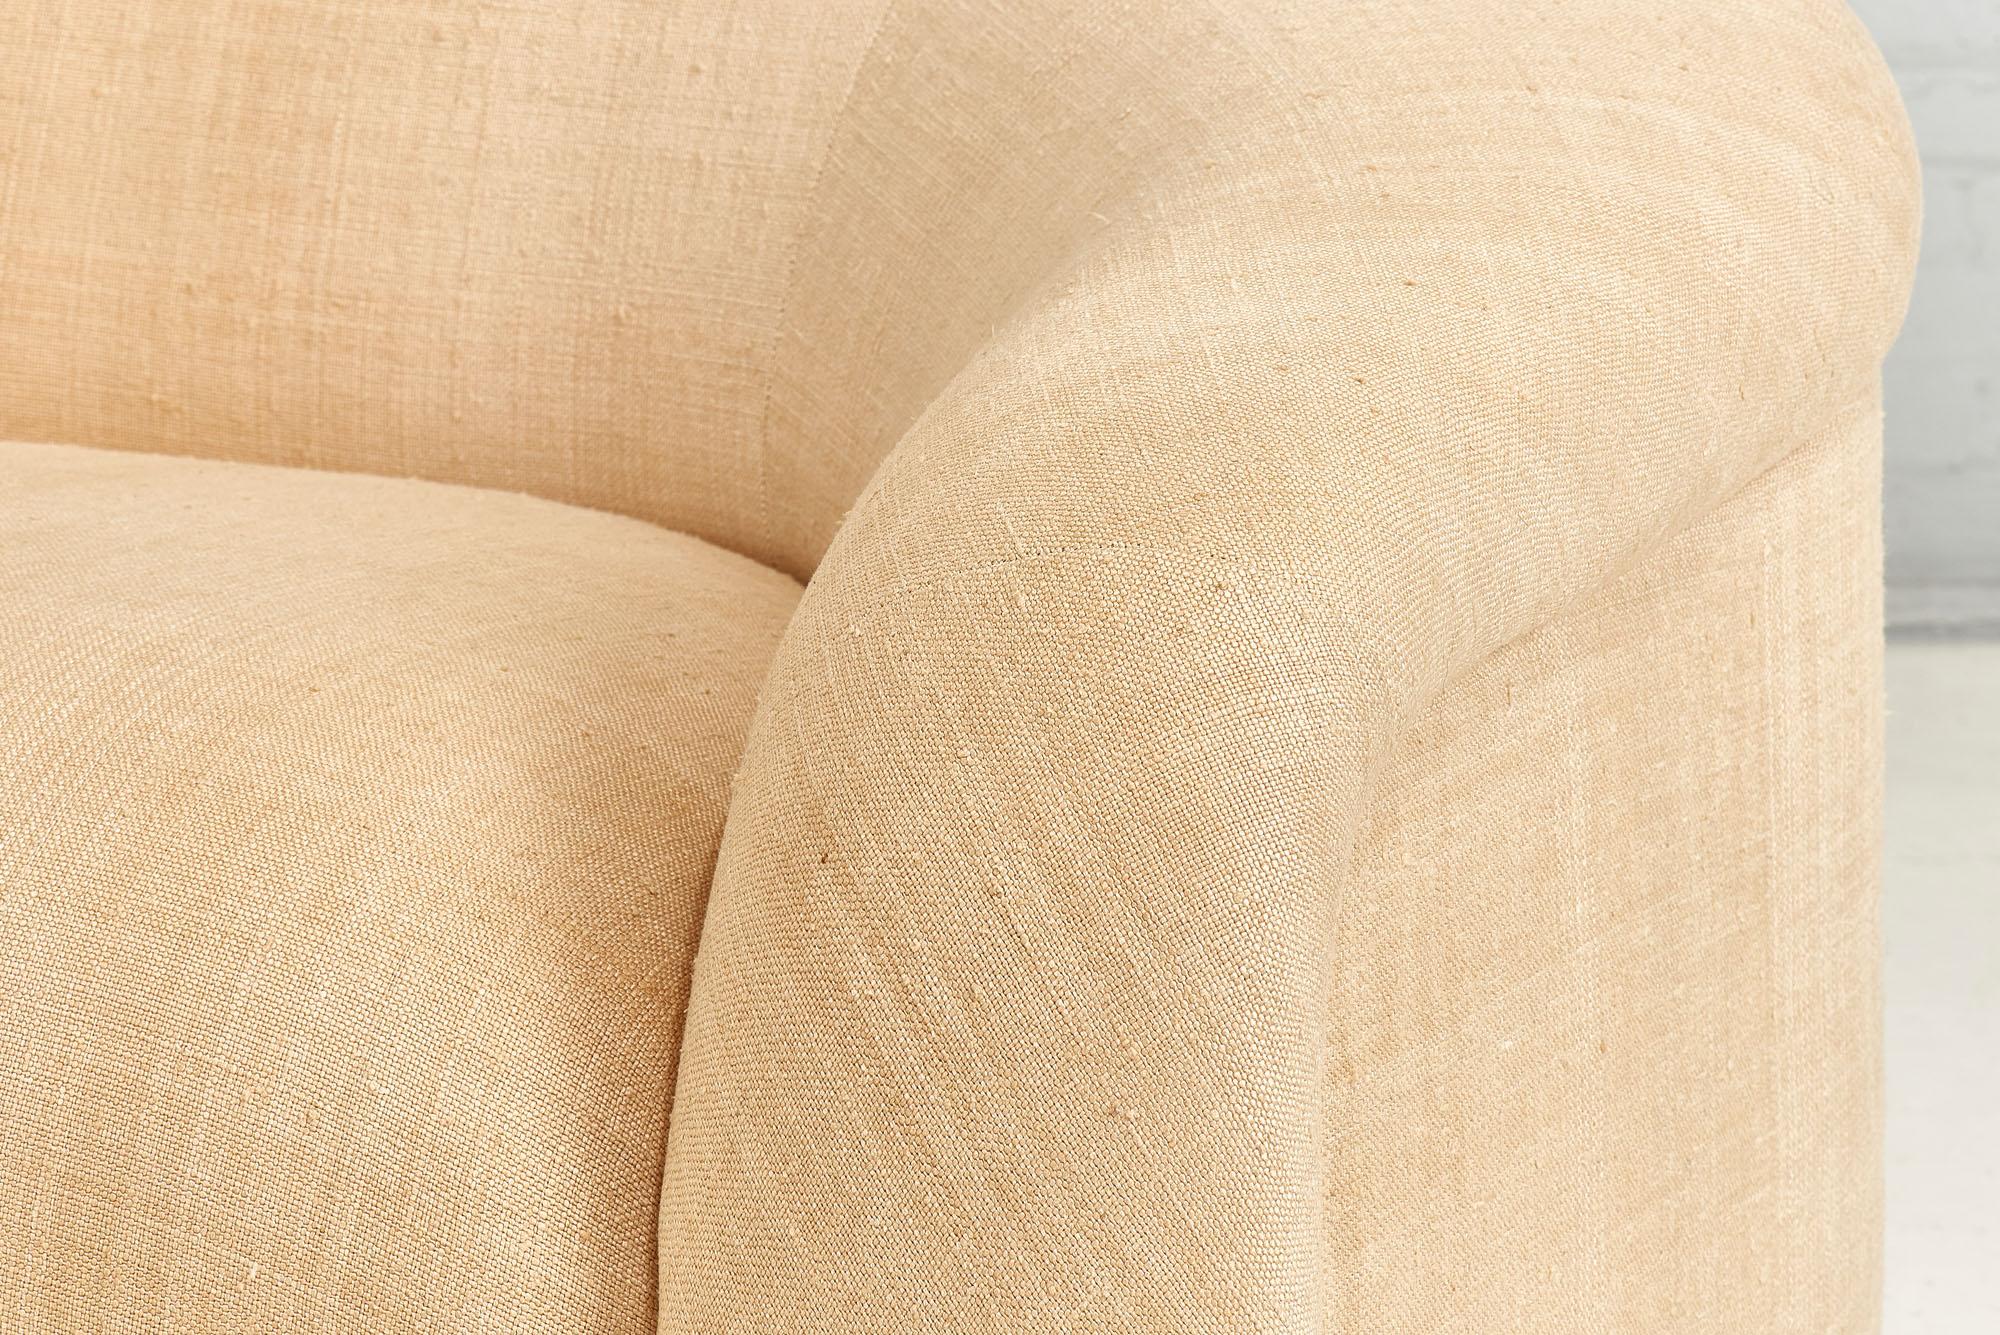 Organic Form Sofa by Preview, ca 1991 2